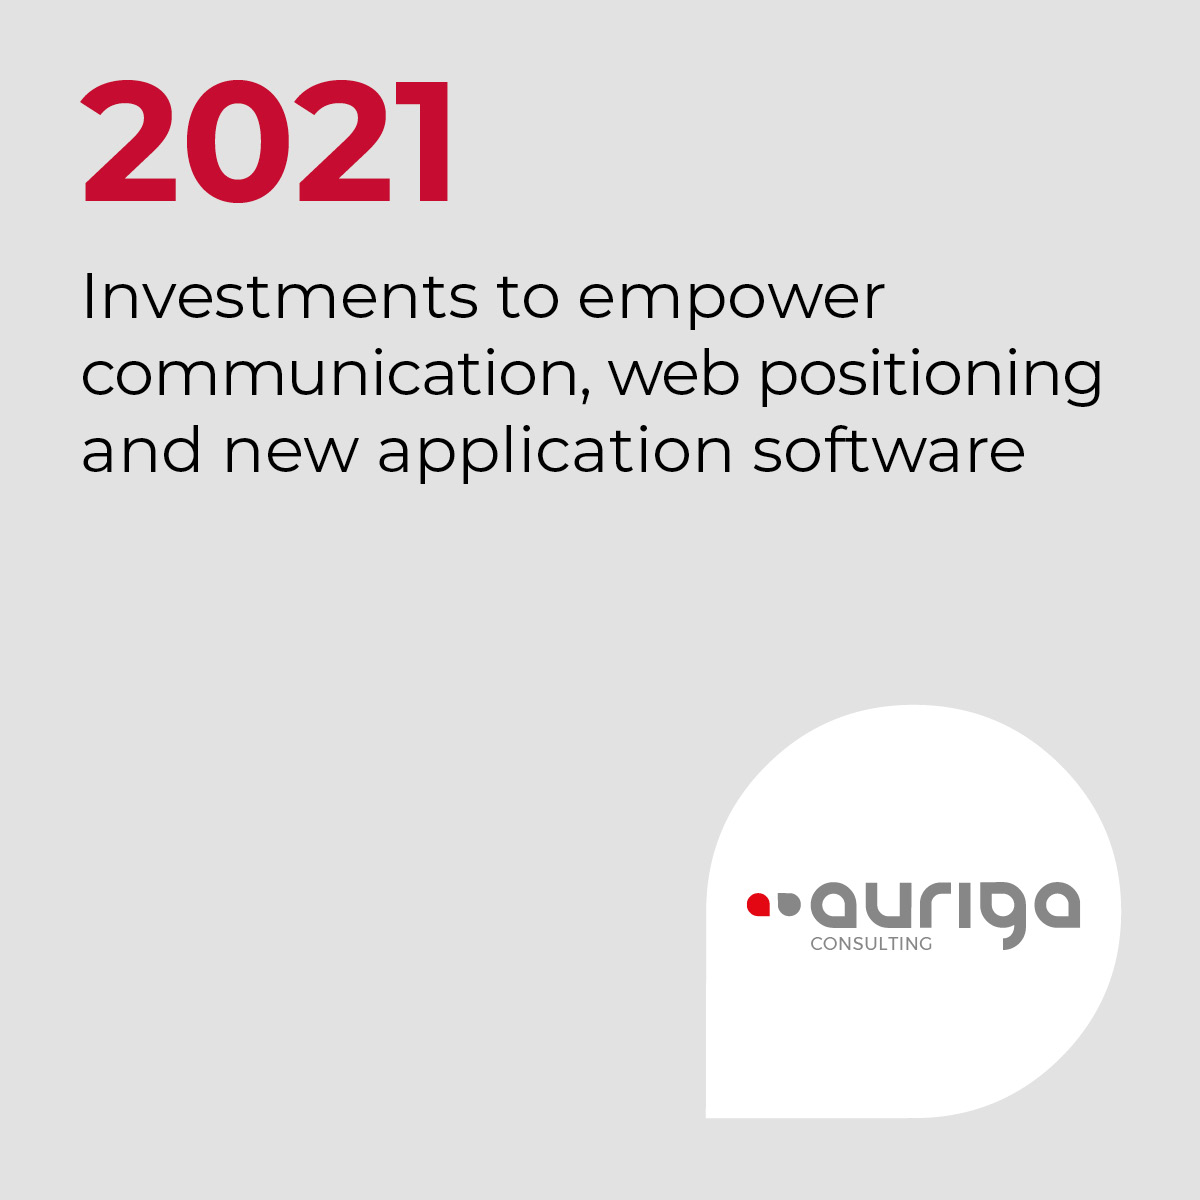 2021, Investments to empower communication, web positioning and new application software